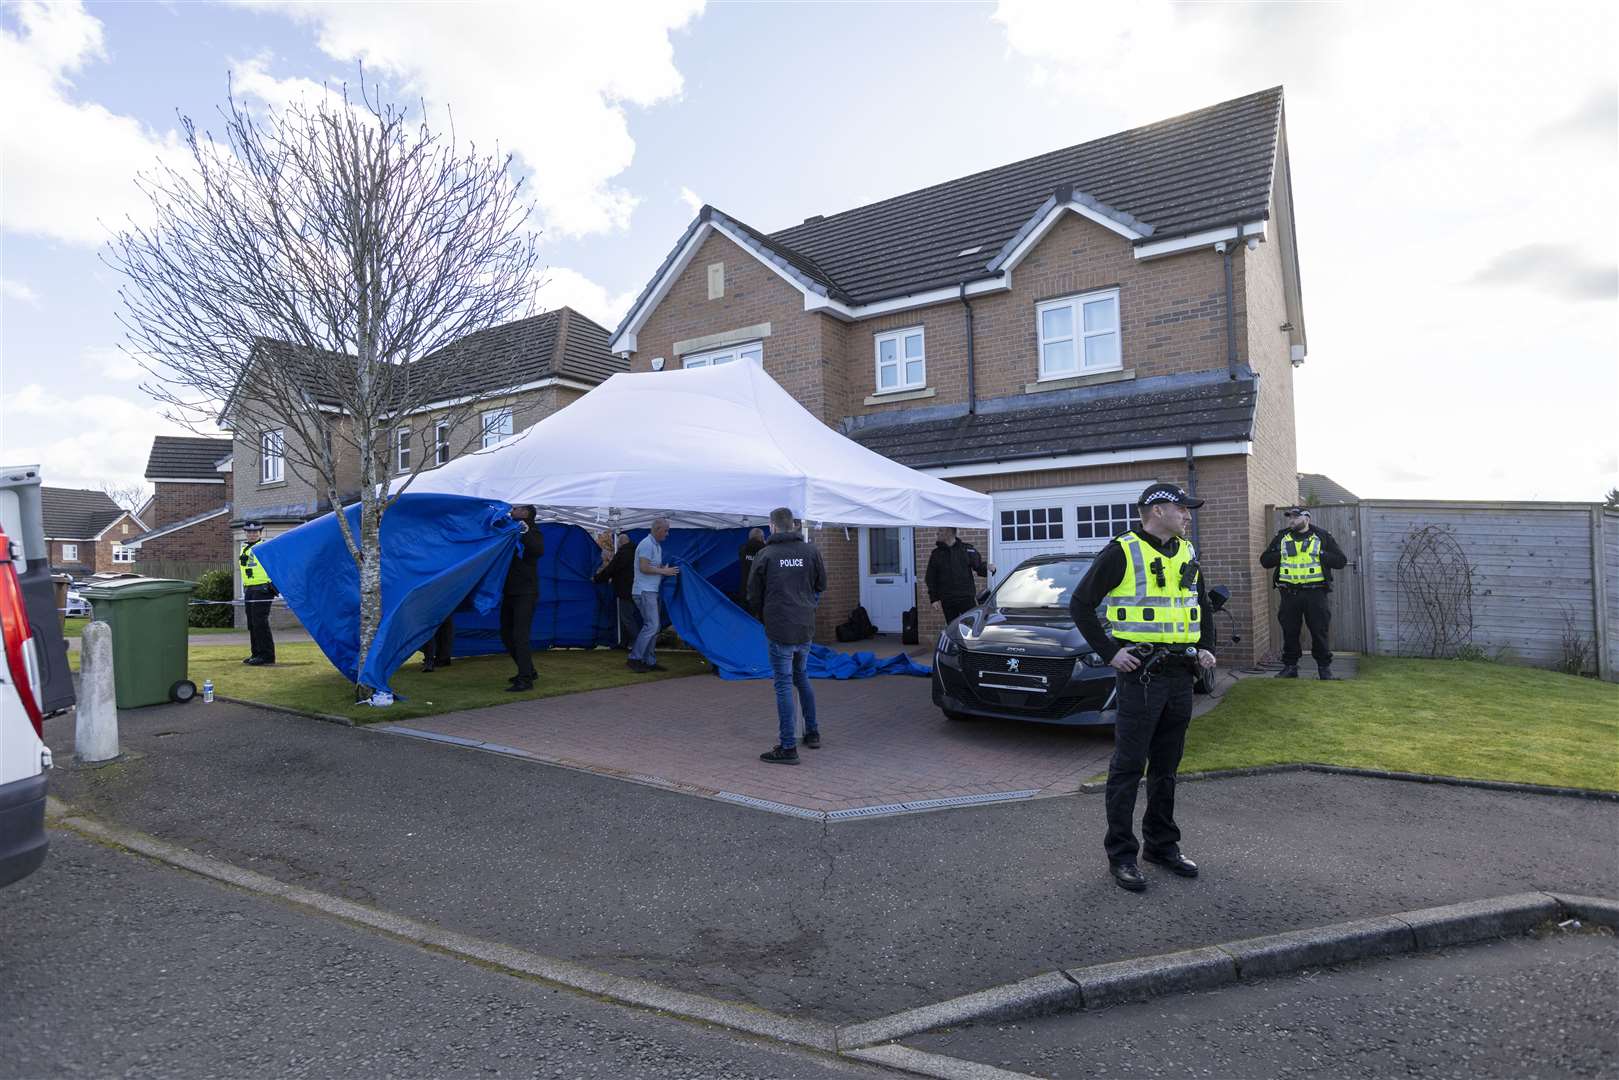 Officers from Police Scotland searched the home Nicola Sturgeon shares with her husband, former SNP chief executive Peter Murrell. (RObert Perry/PA)